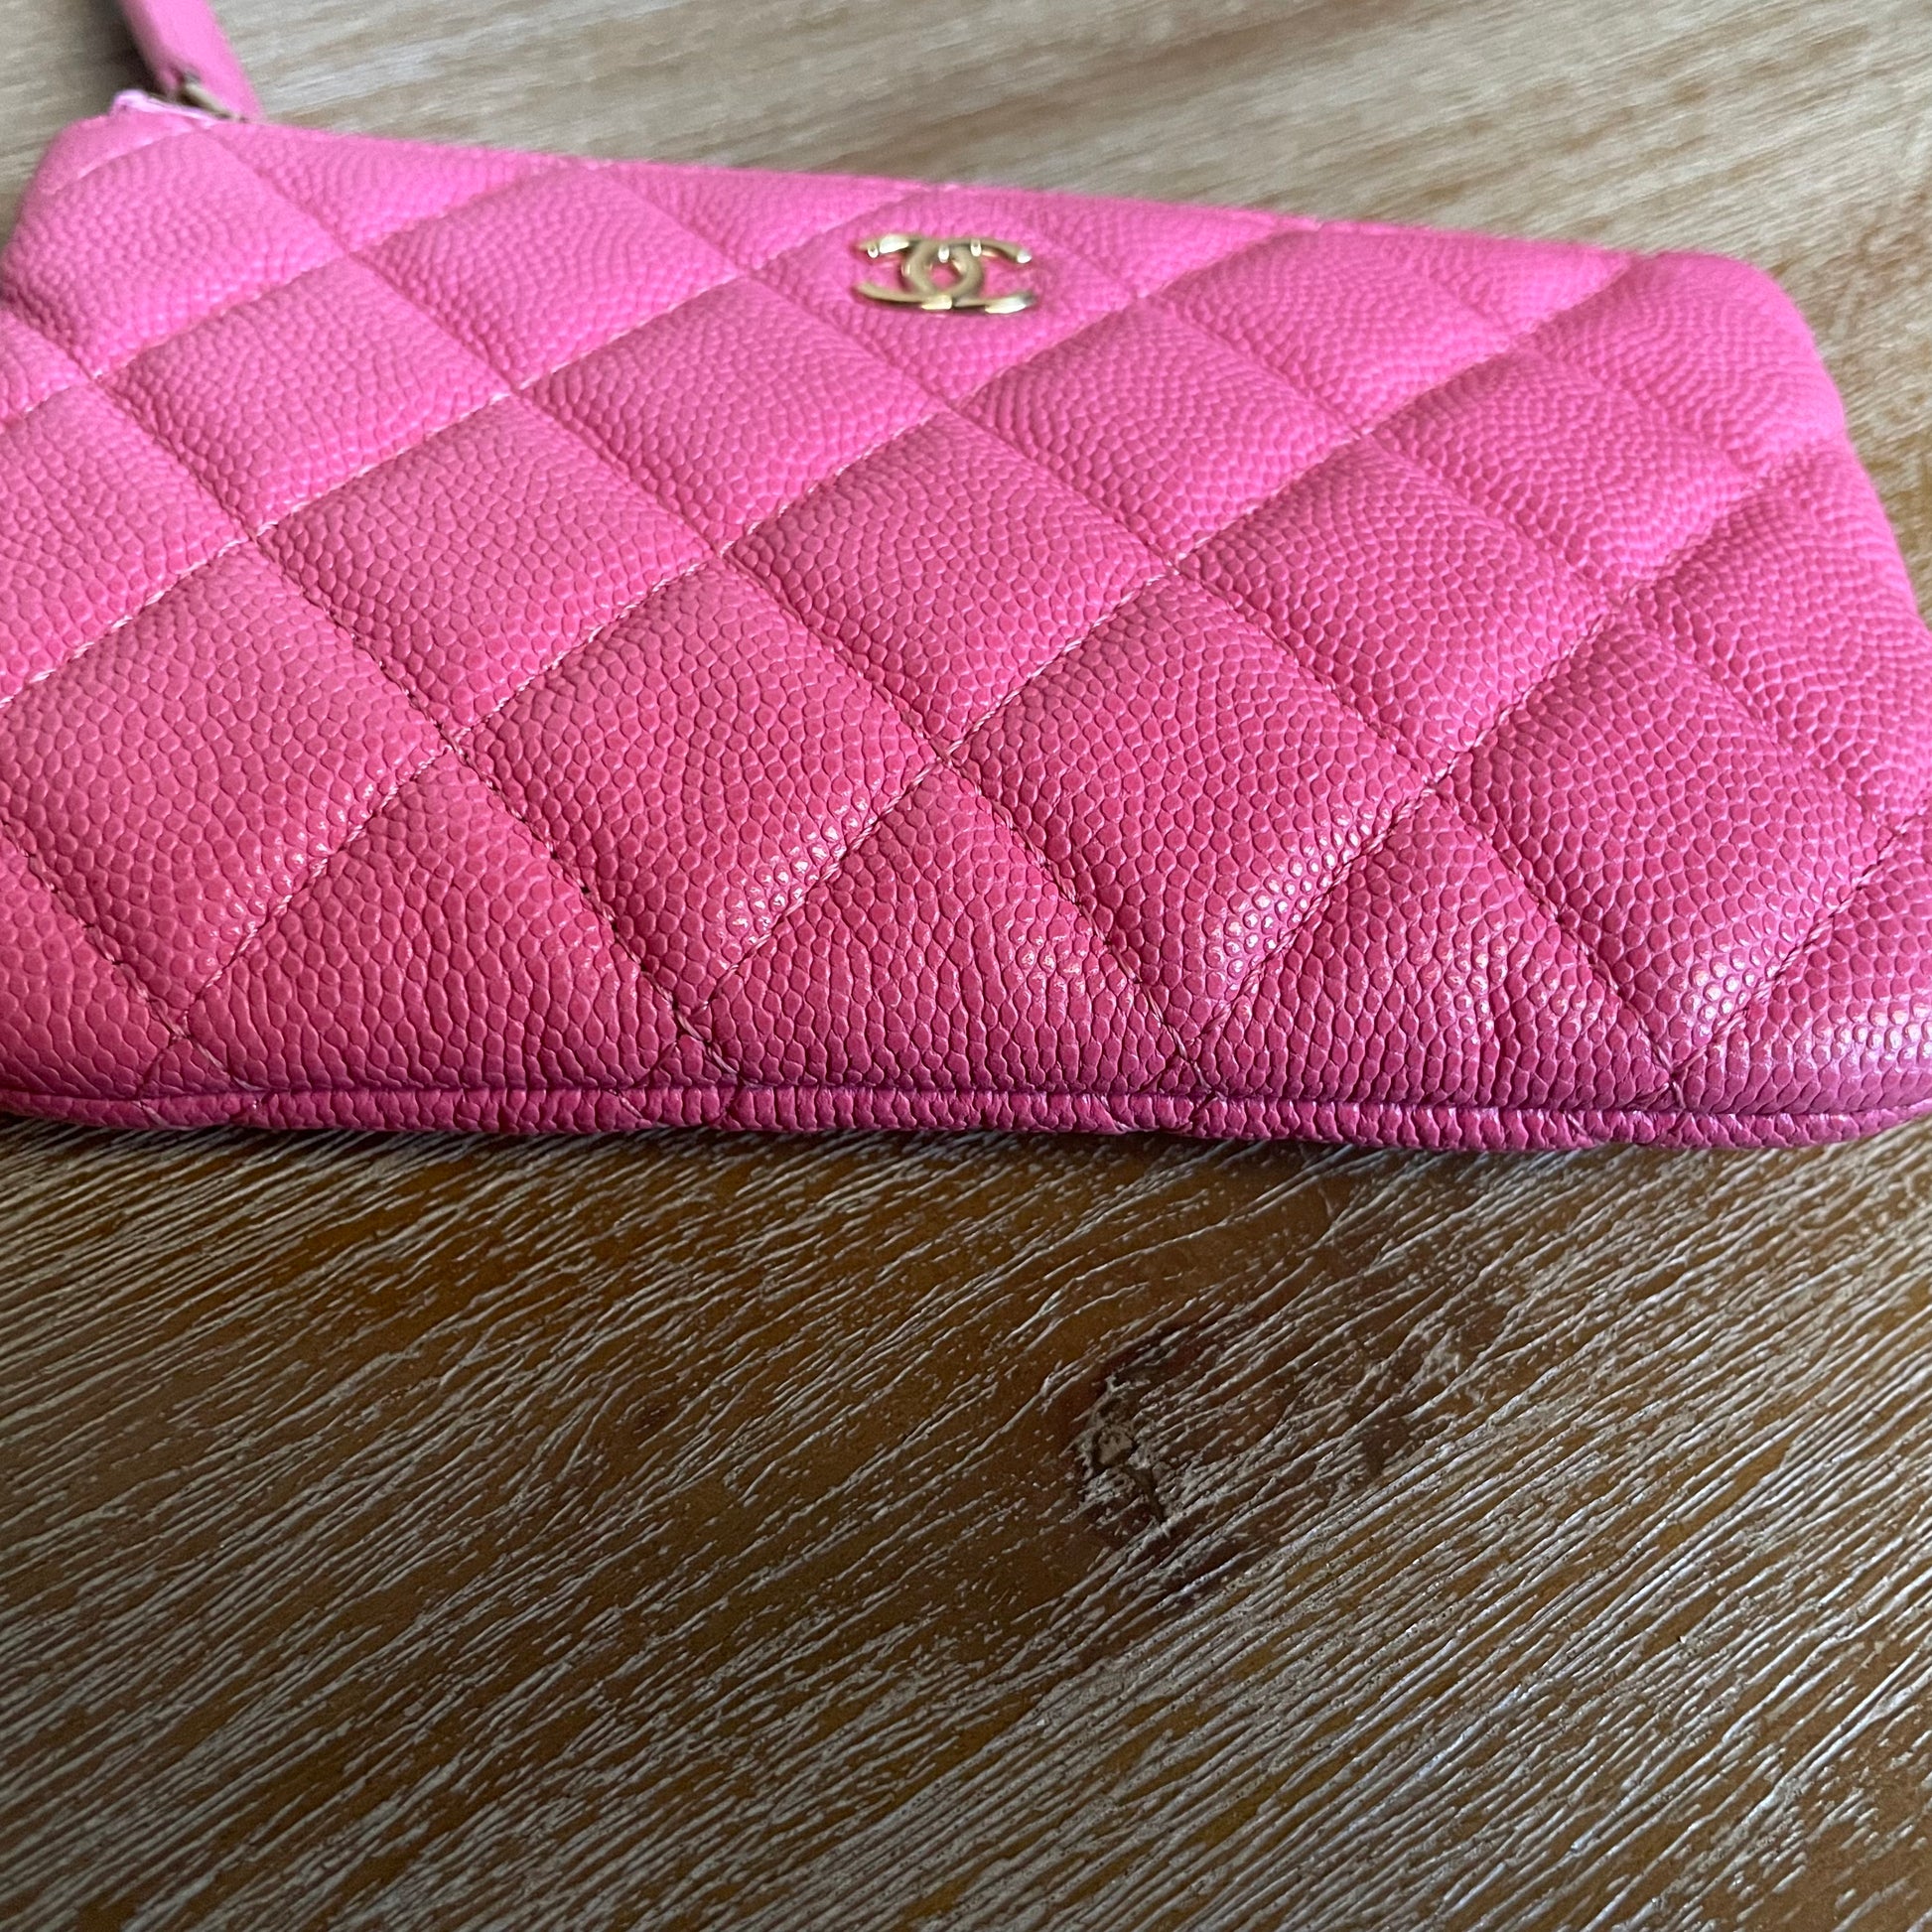 CHANEL PINK CAVIAR LEATHER O CASE SMALL CLUTCH